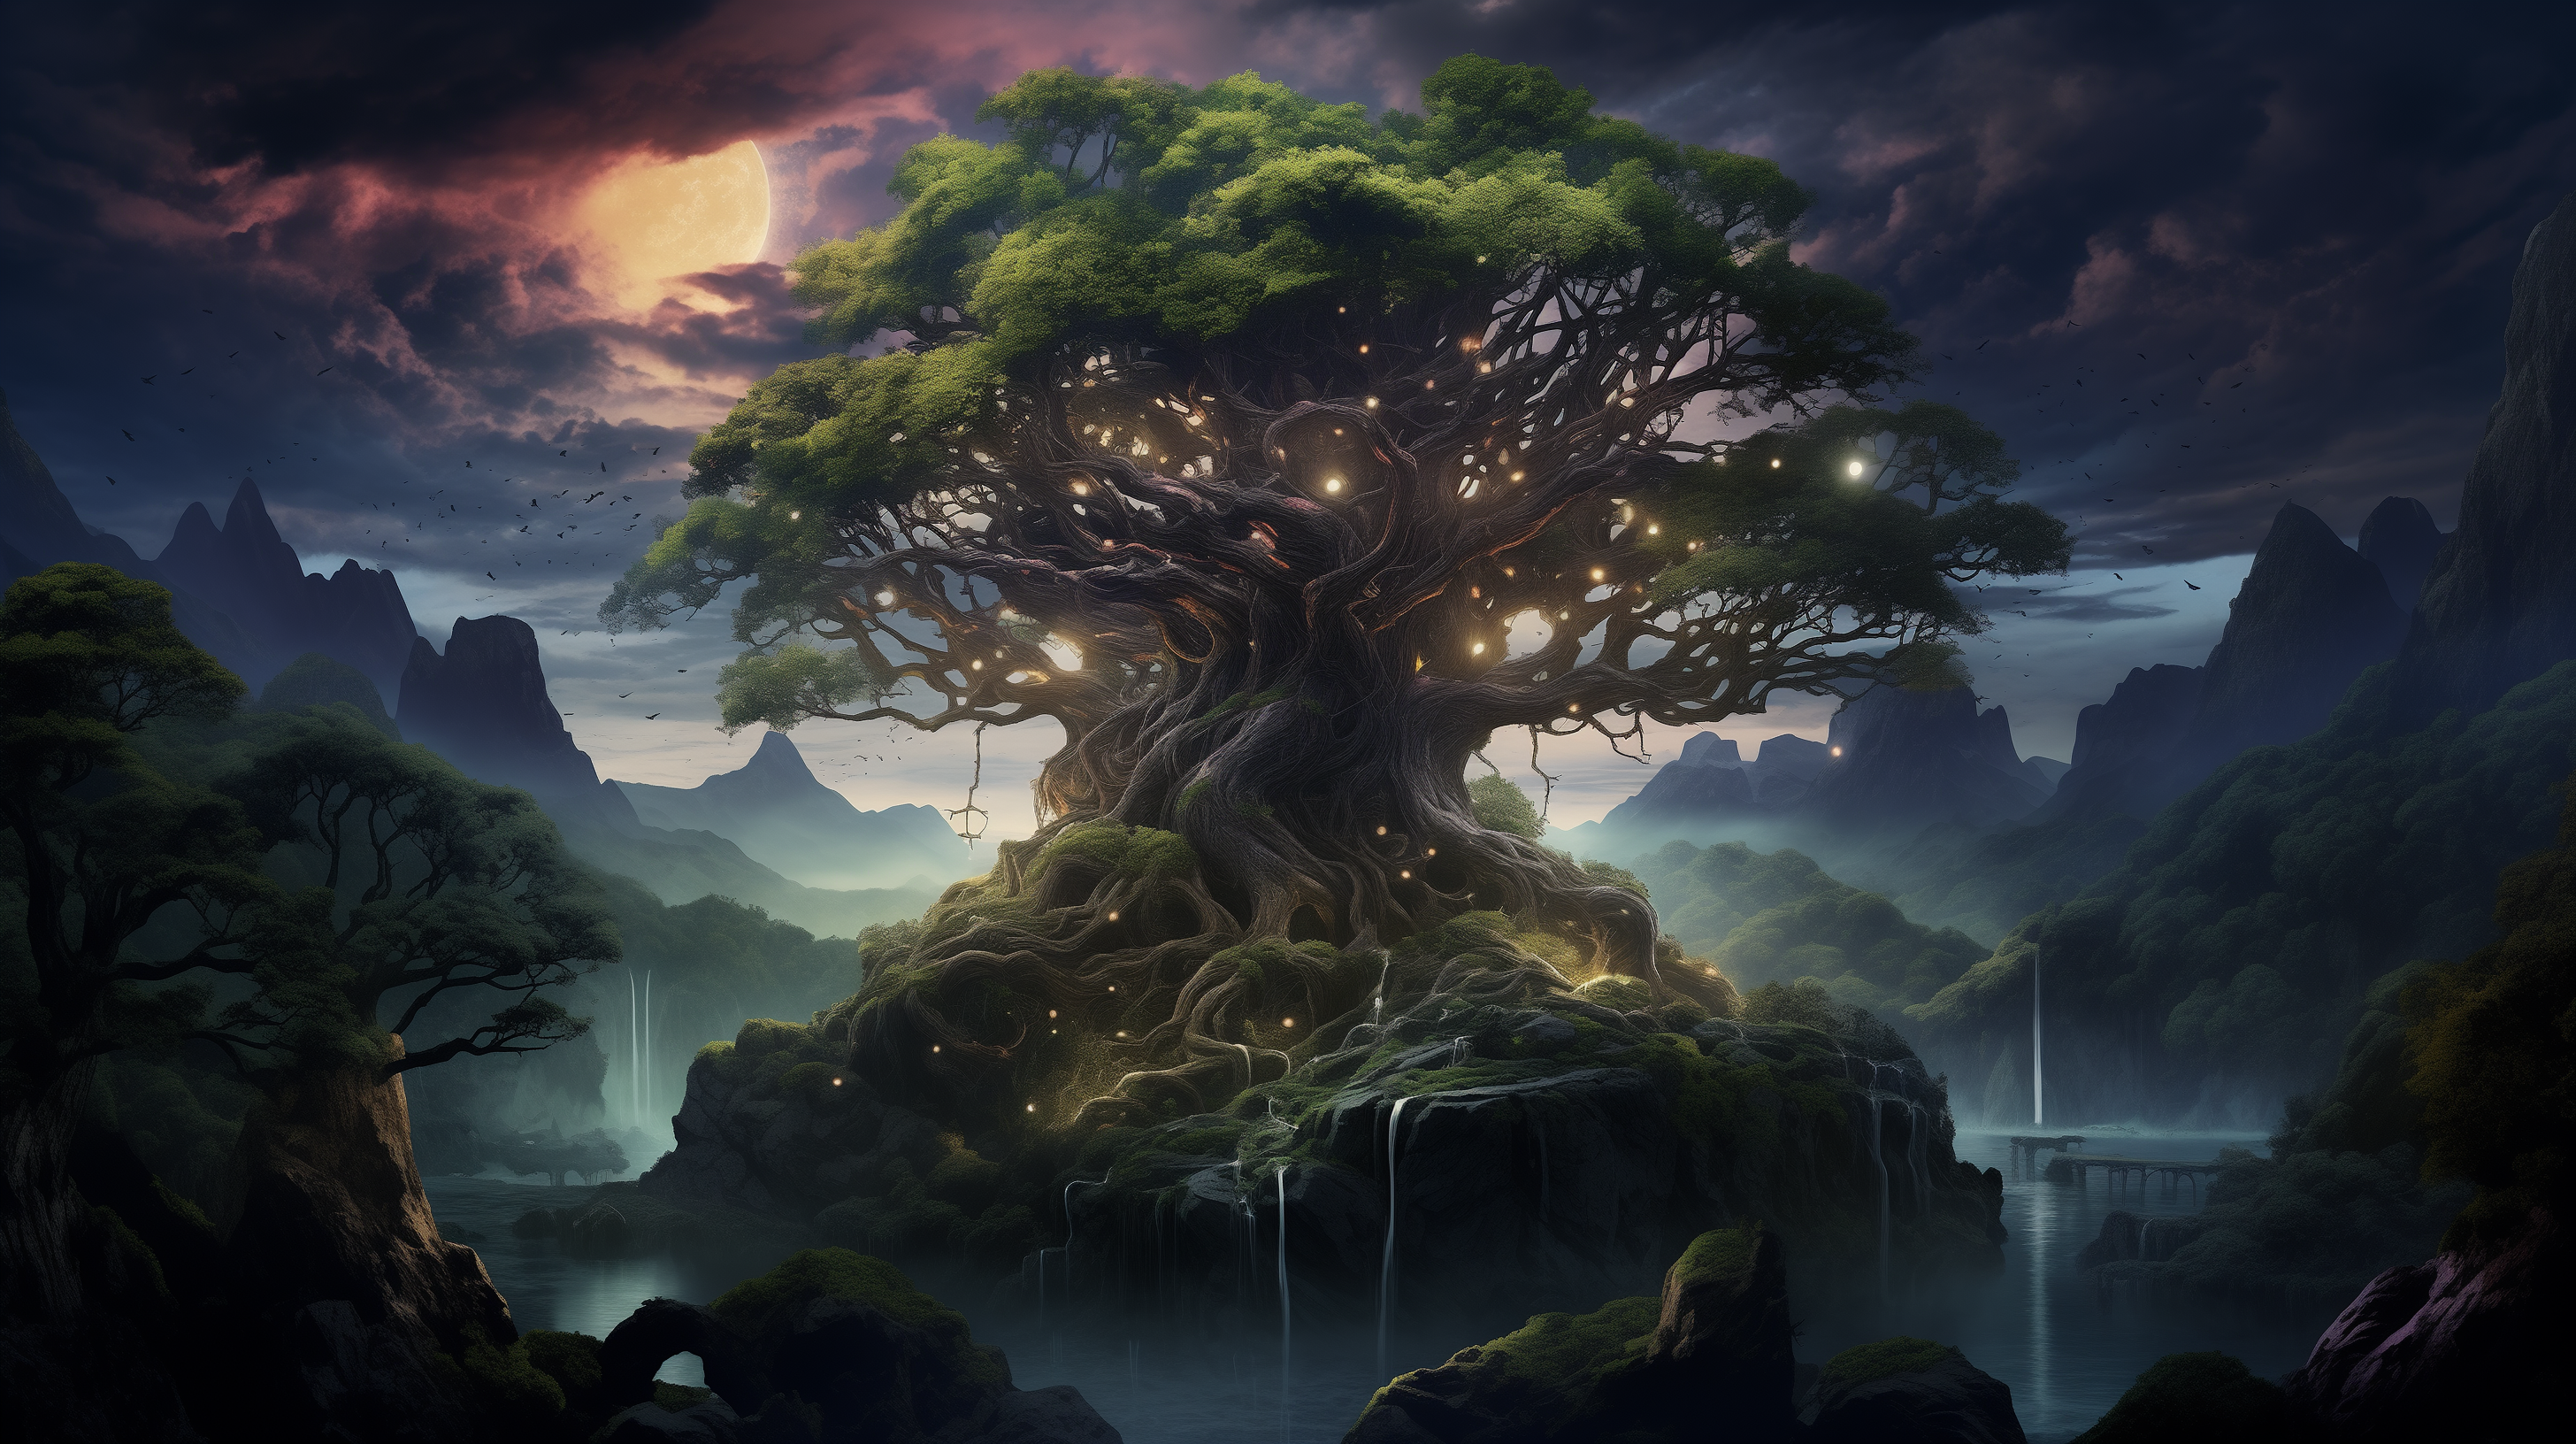 HD wallpaper of mythical Yggdrasil tree with glowing lights and cascades set against a mystical landscape background.